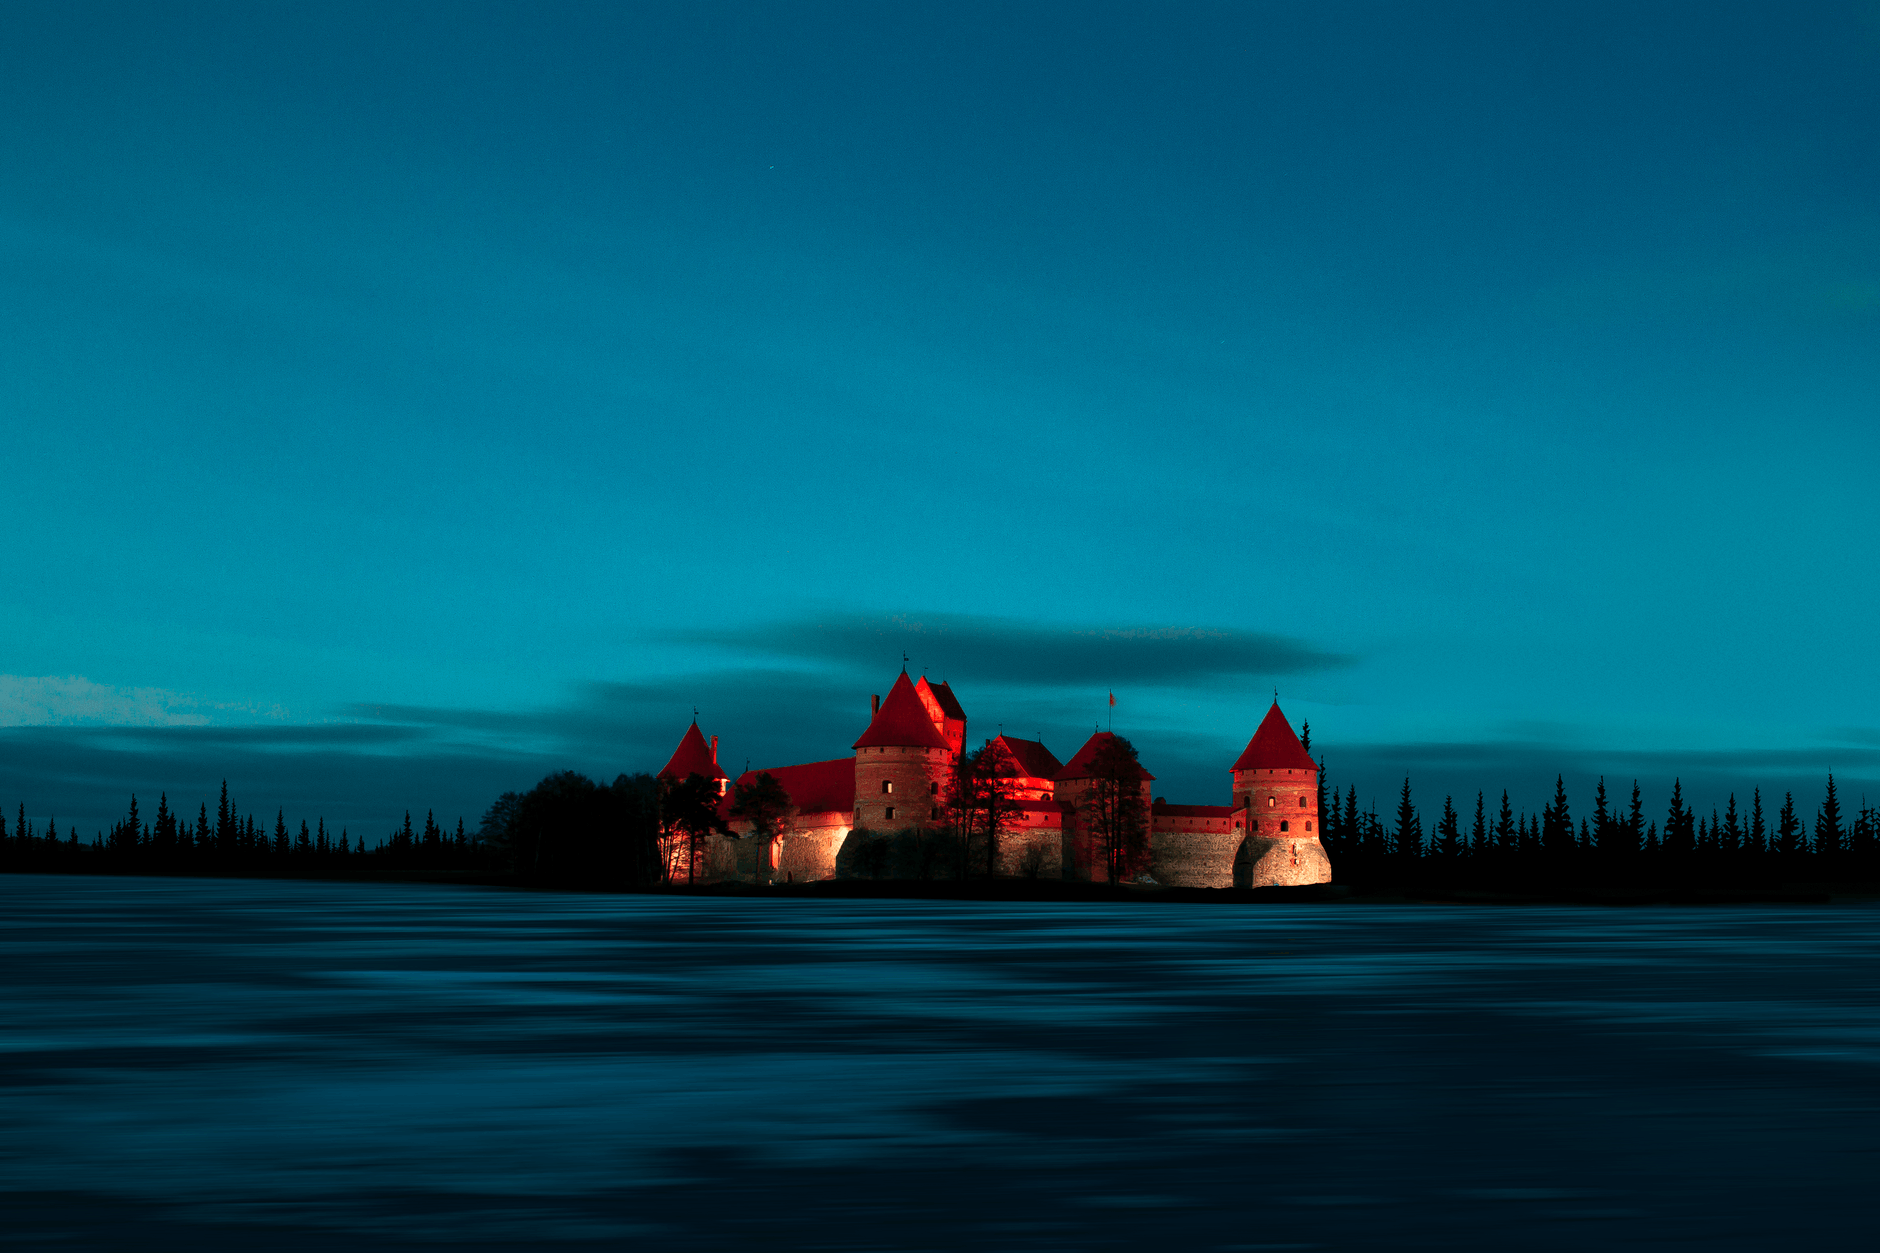 structural photography of castle during nighttime